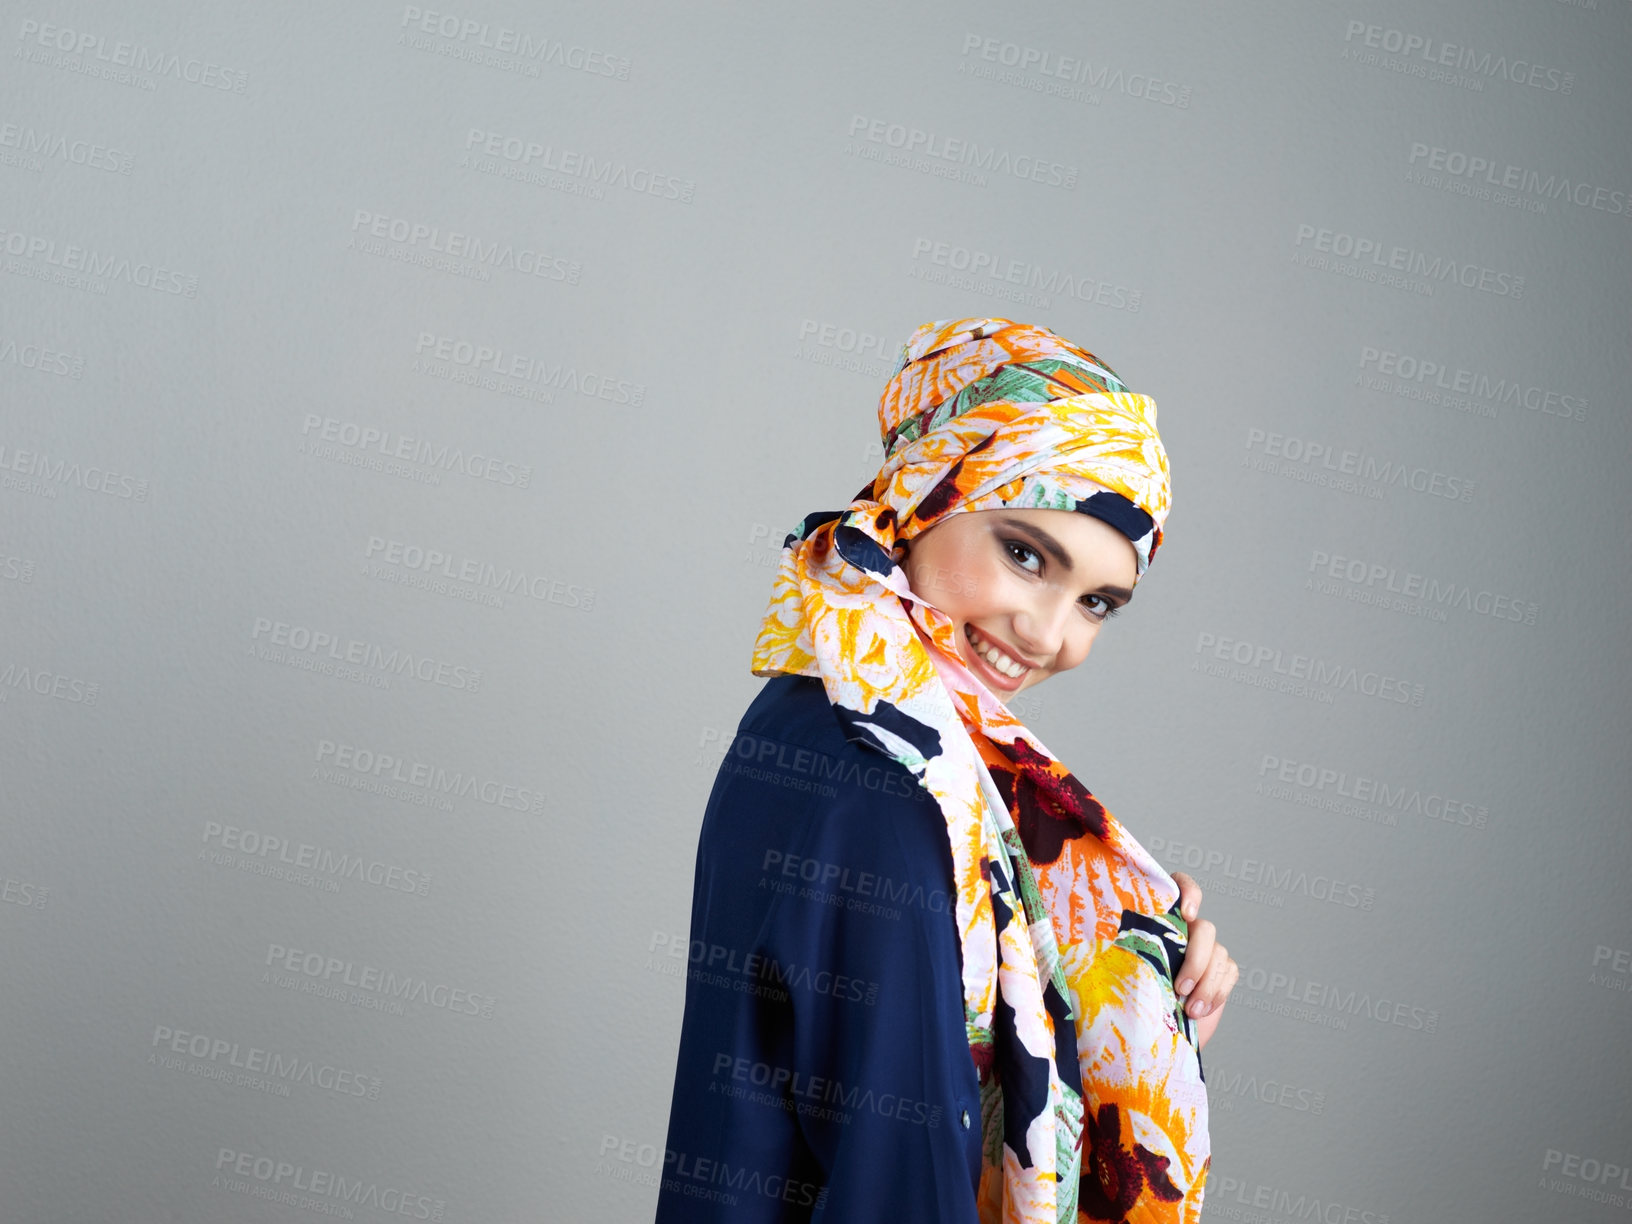 Buy stock photo Studio portrait of a confident young woman wearing a colorful head scarf while posing against a grey background